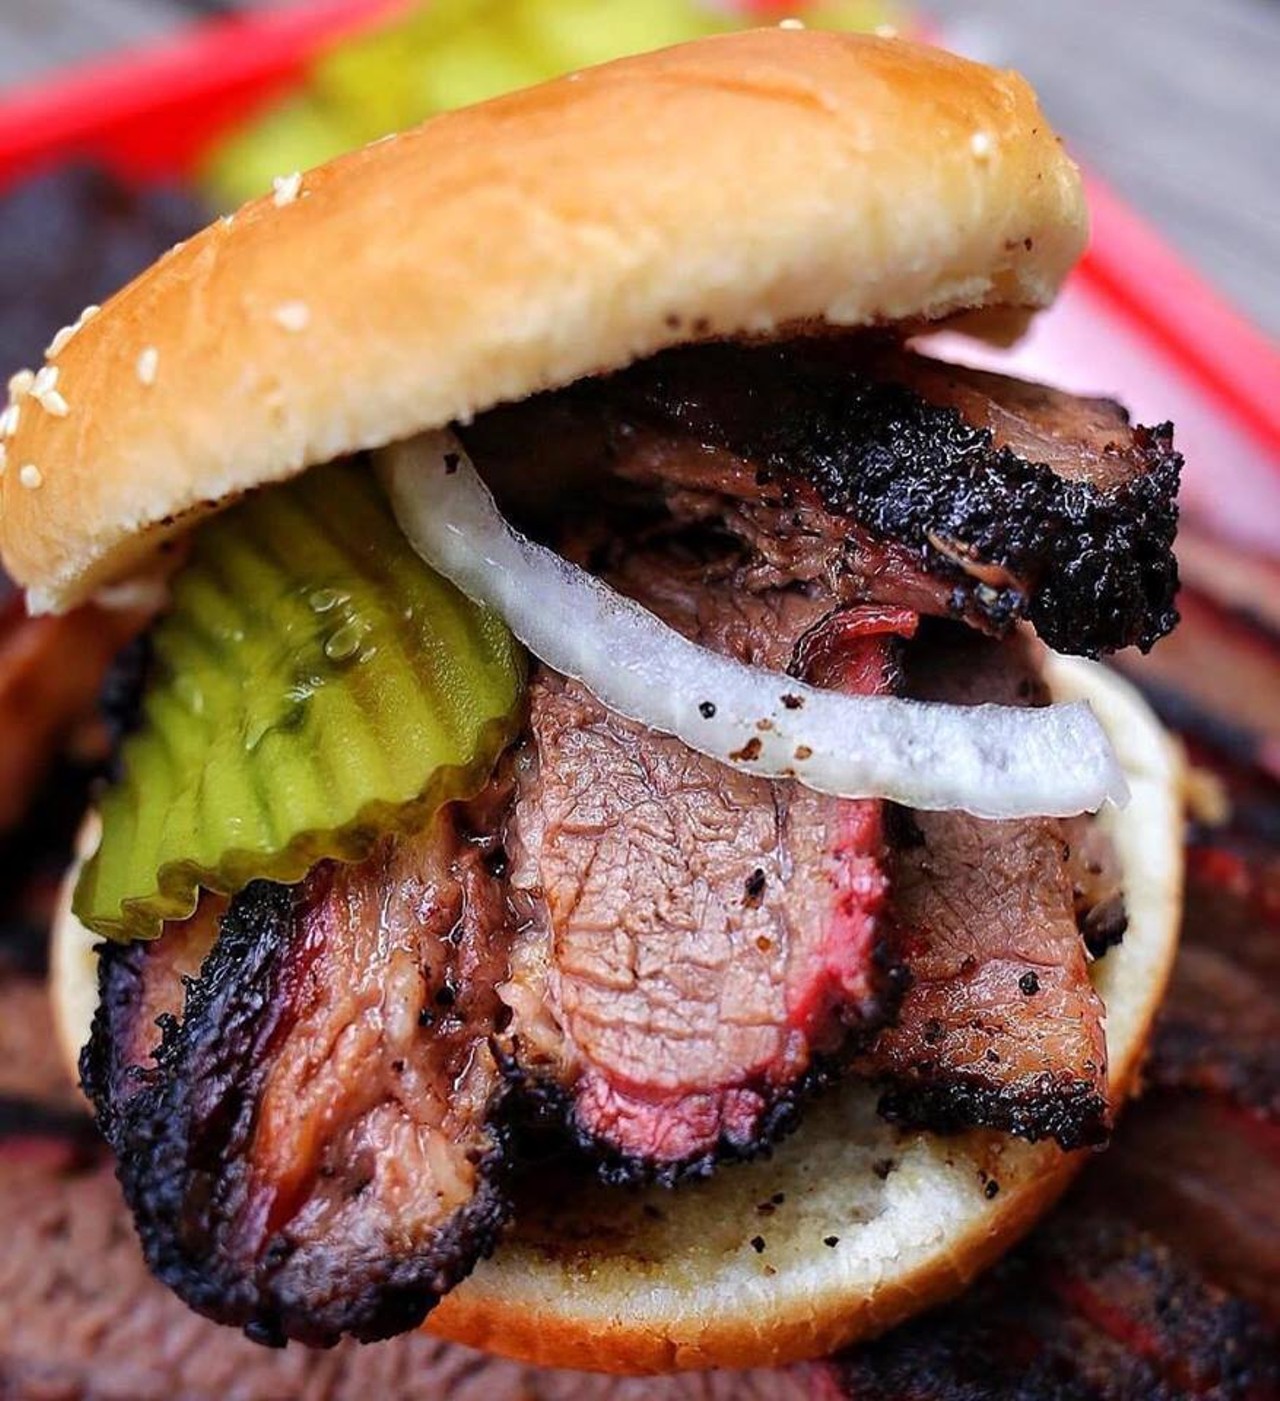 King's Hwy Brew & Q
1012 N Flores St, kingshwybnq.com
Though a favorite about locals and visiting foodies alike, pitmaster Emilio Soliz decided to closed the famed King’s Hwy in late September. Soliz and and wife Christi joined B Daddy's BBQ in Helotes.
Photo via Instagram / s.a.vortooth